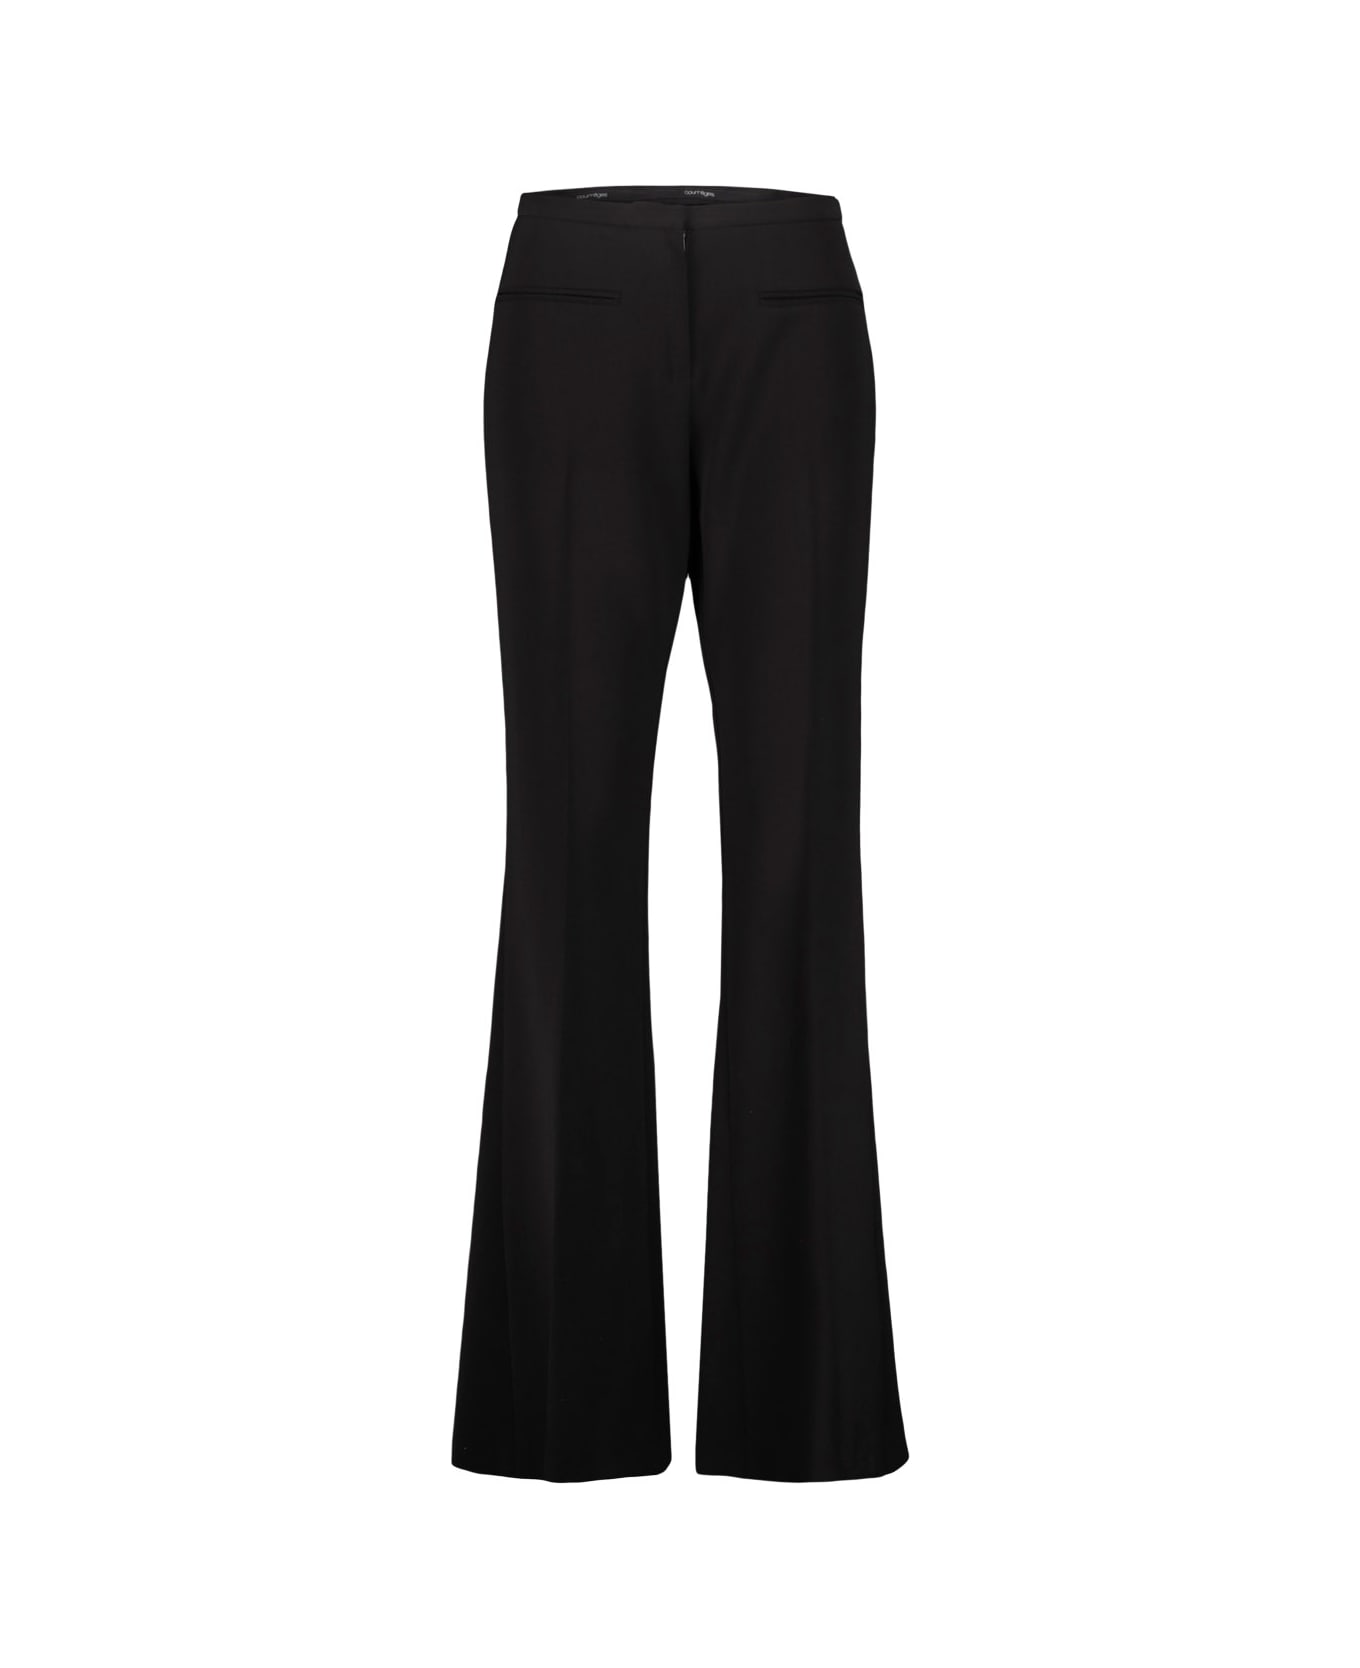 Courrèges Bootcut Tailored Pants - Black ボトムス